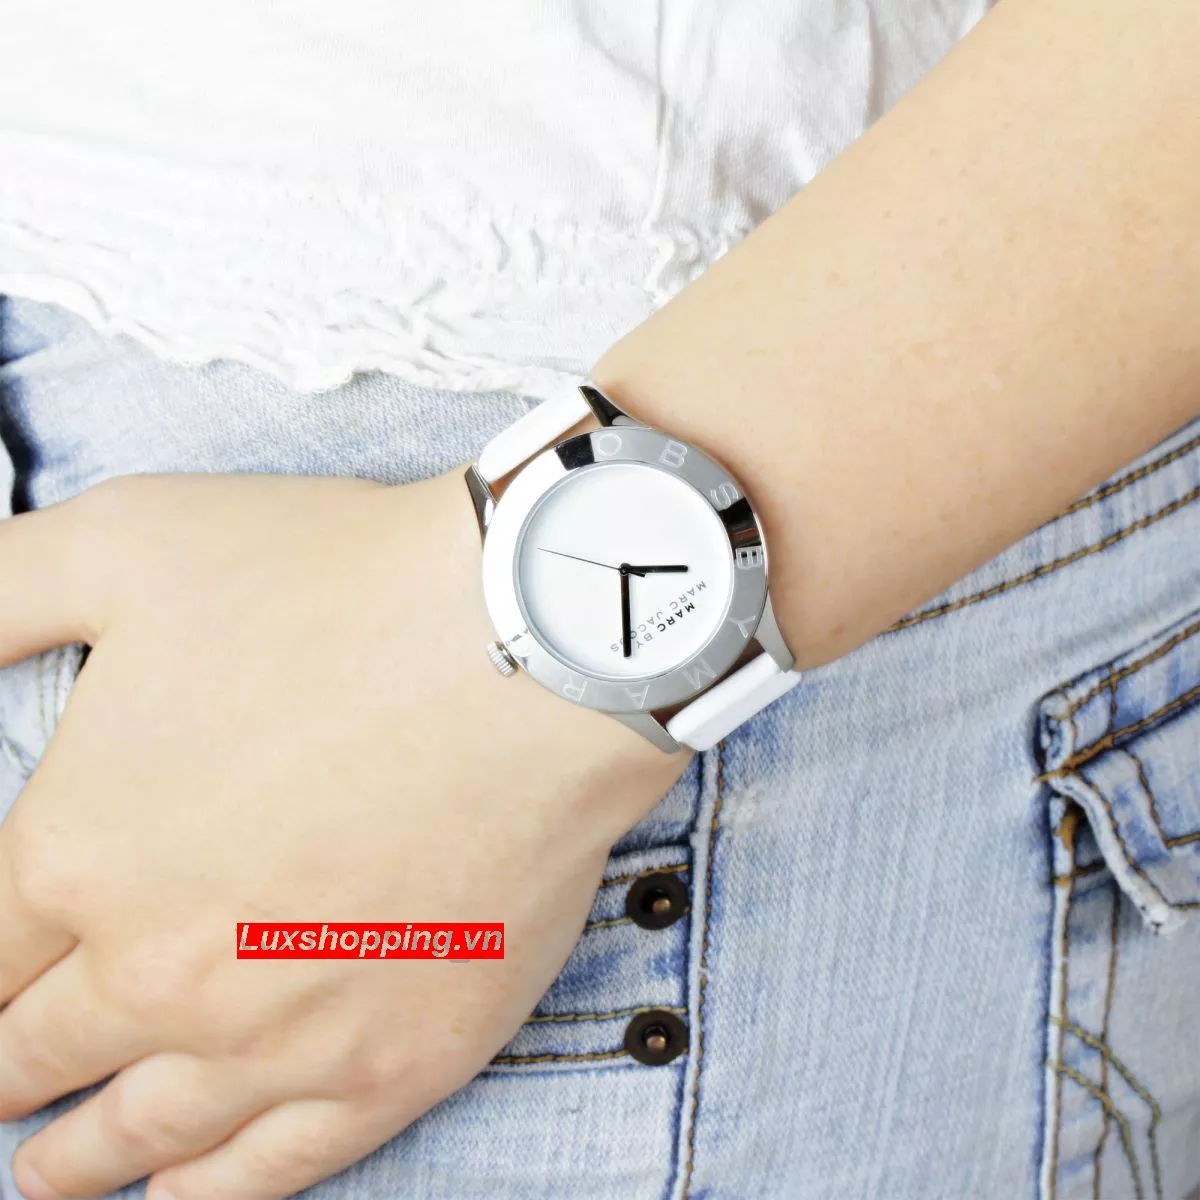 Marc by Marc Jacobs Blade White Watch 40mm